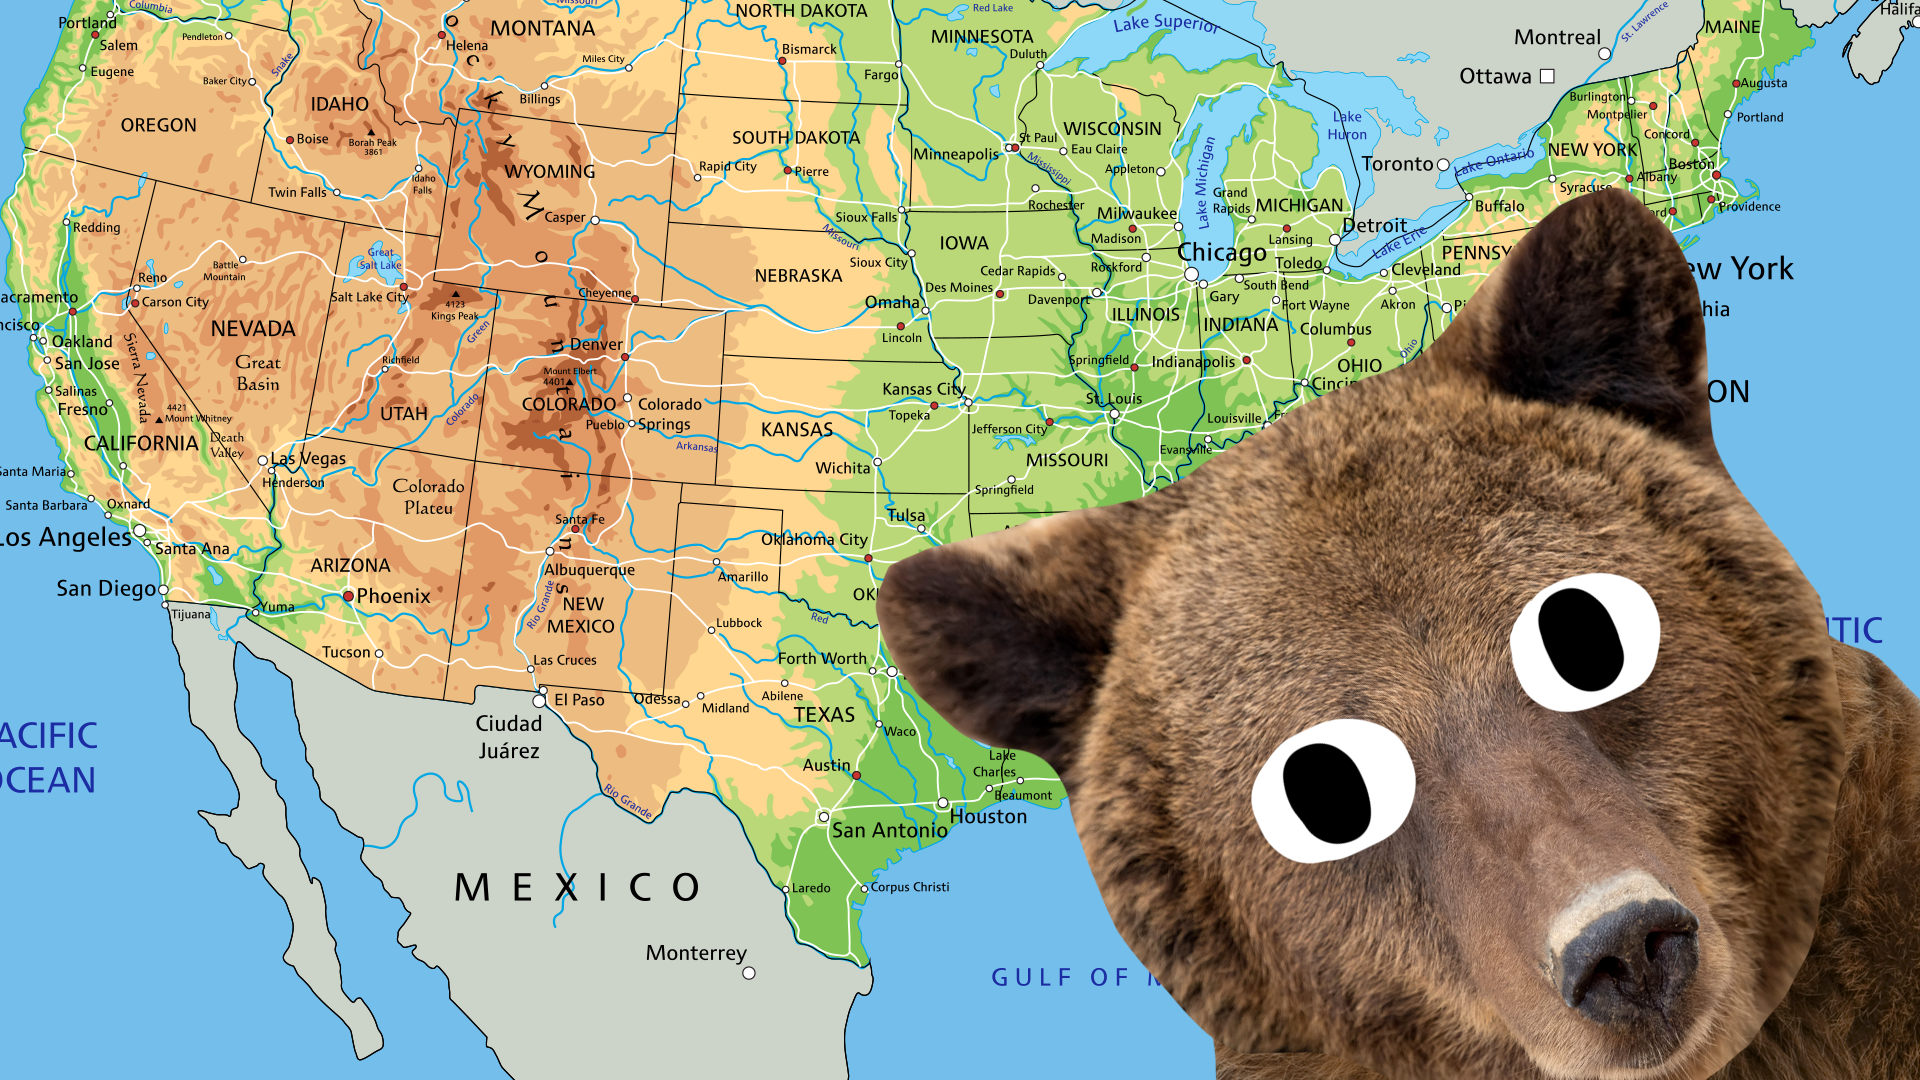 A bear next to a map of the USA